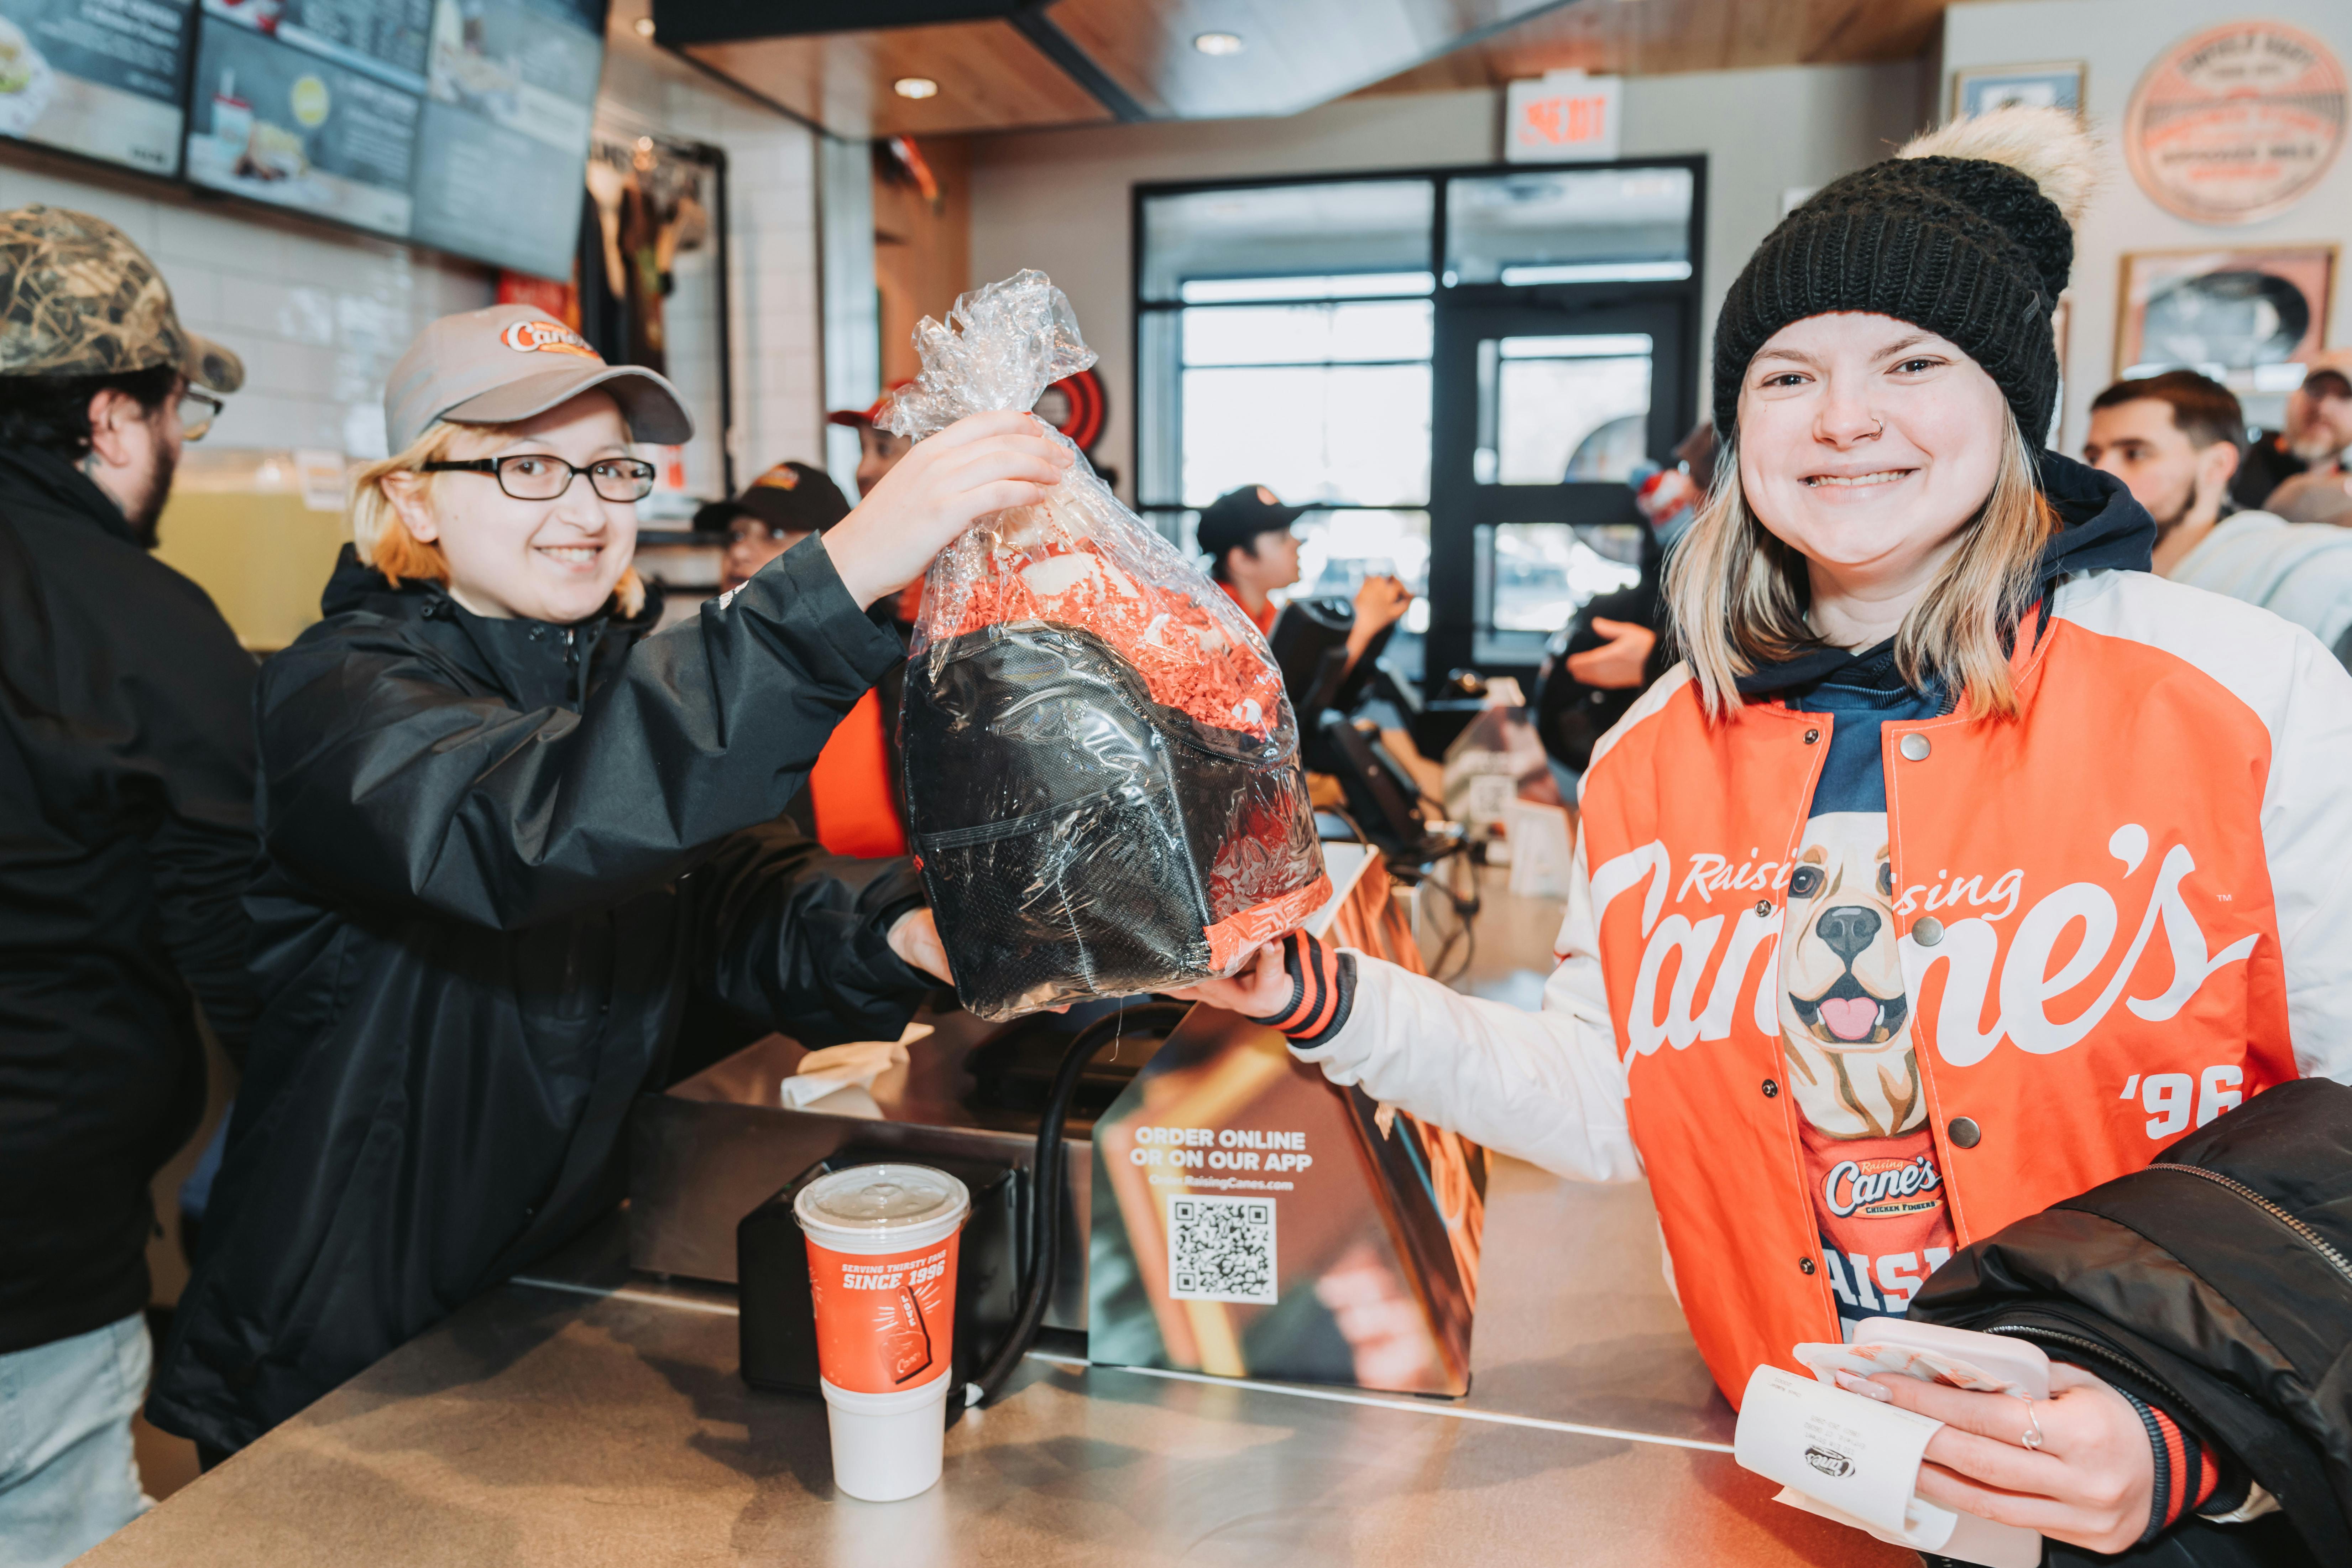 Free Cane's for a year winner at Connecticut opening